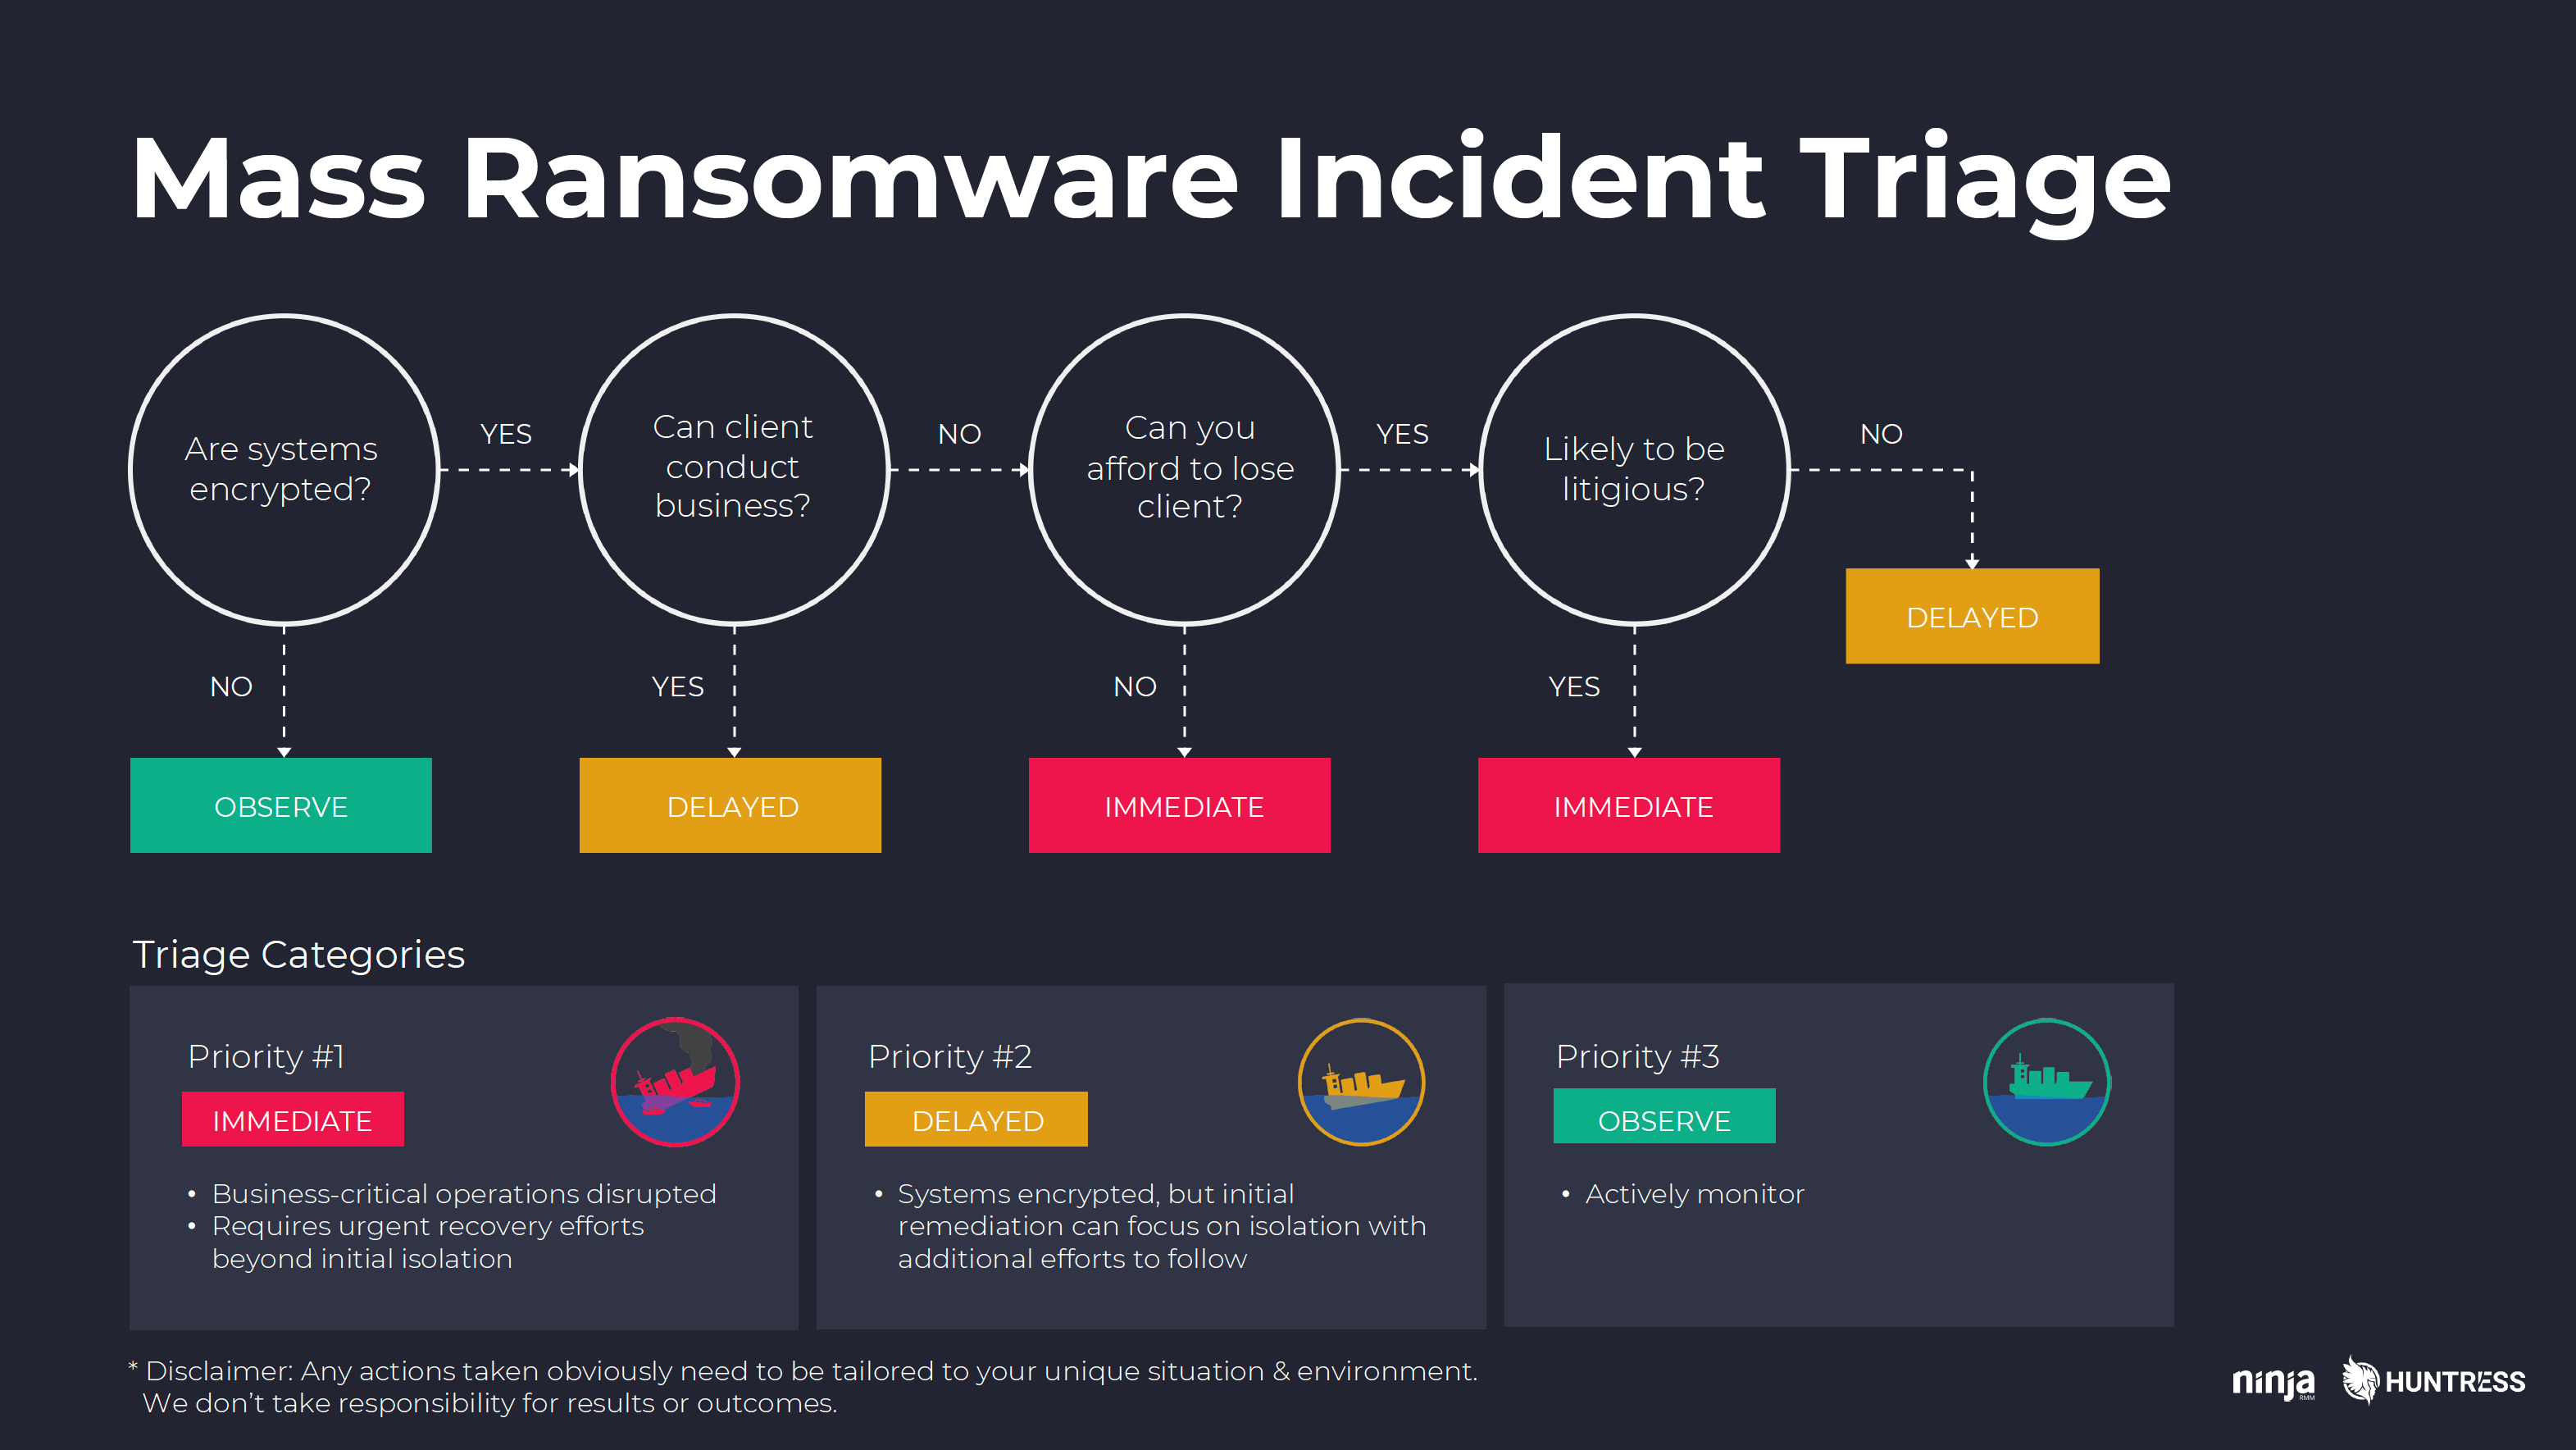 msp ransomware incident response triage